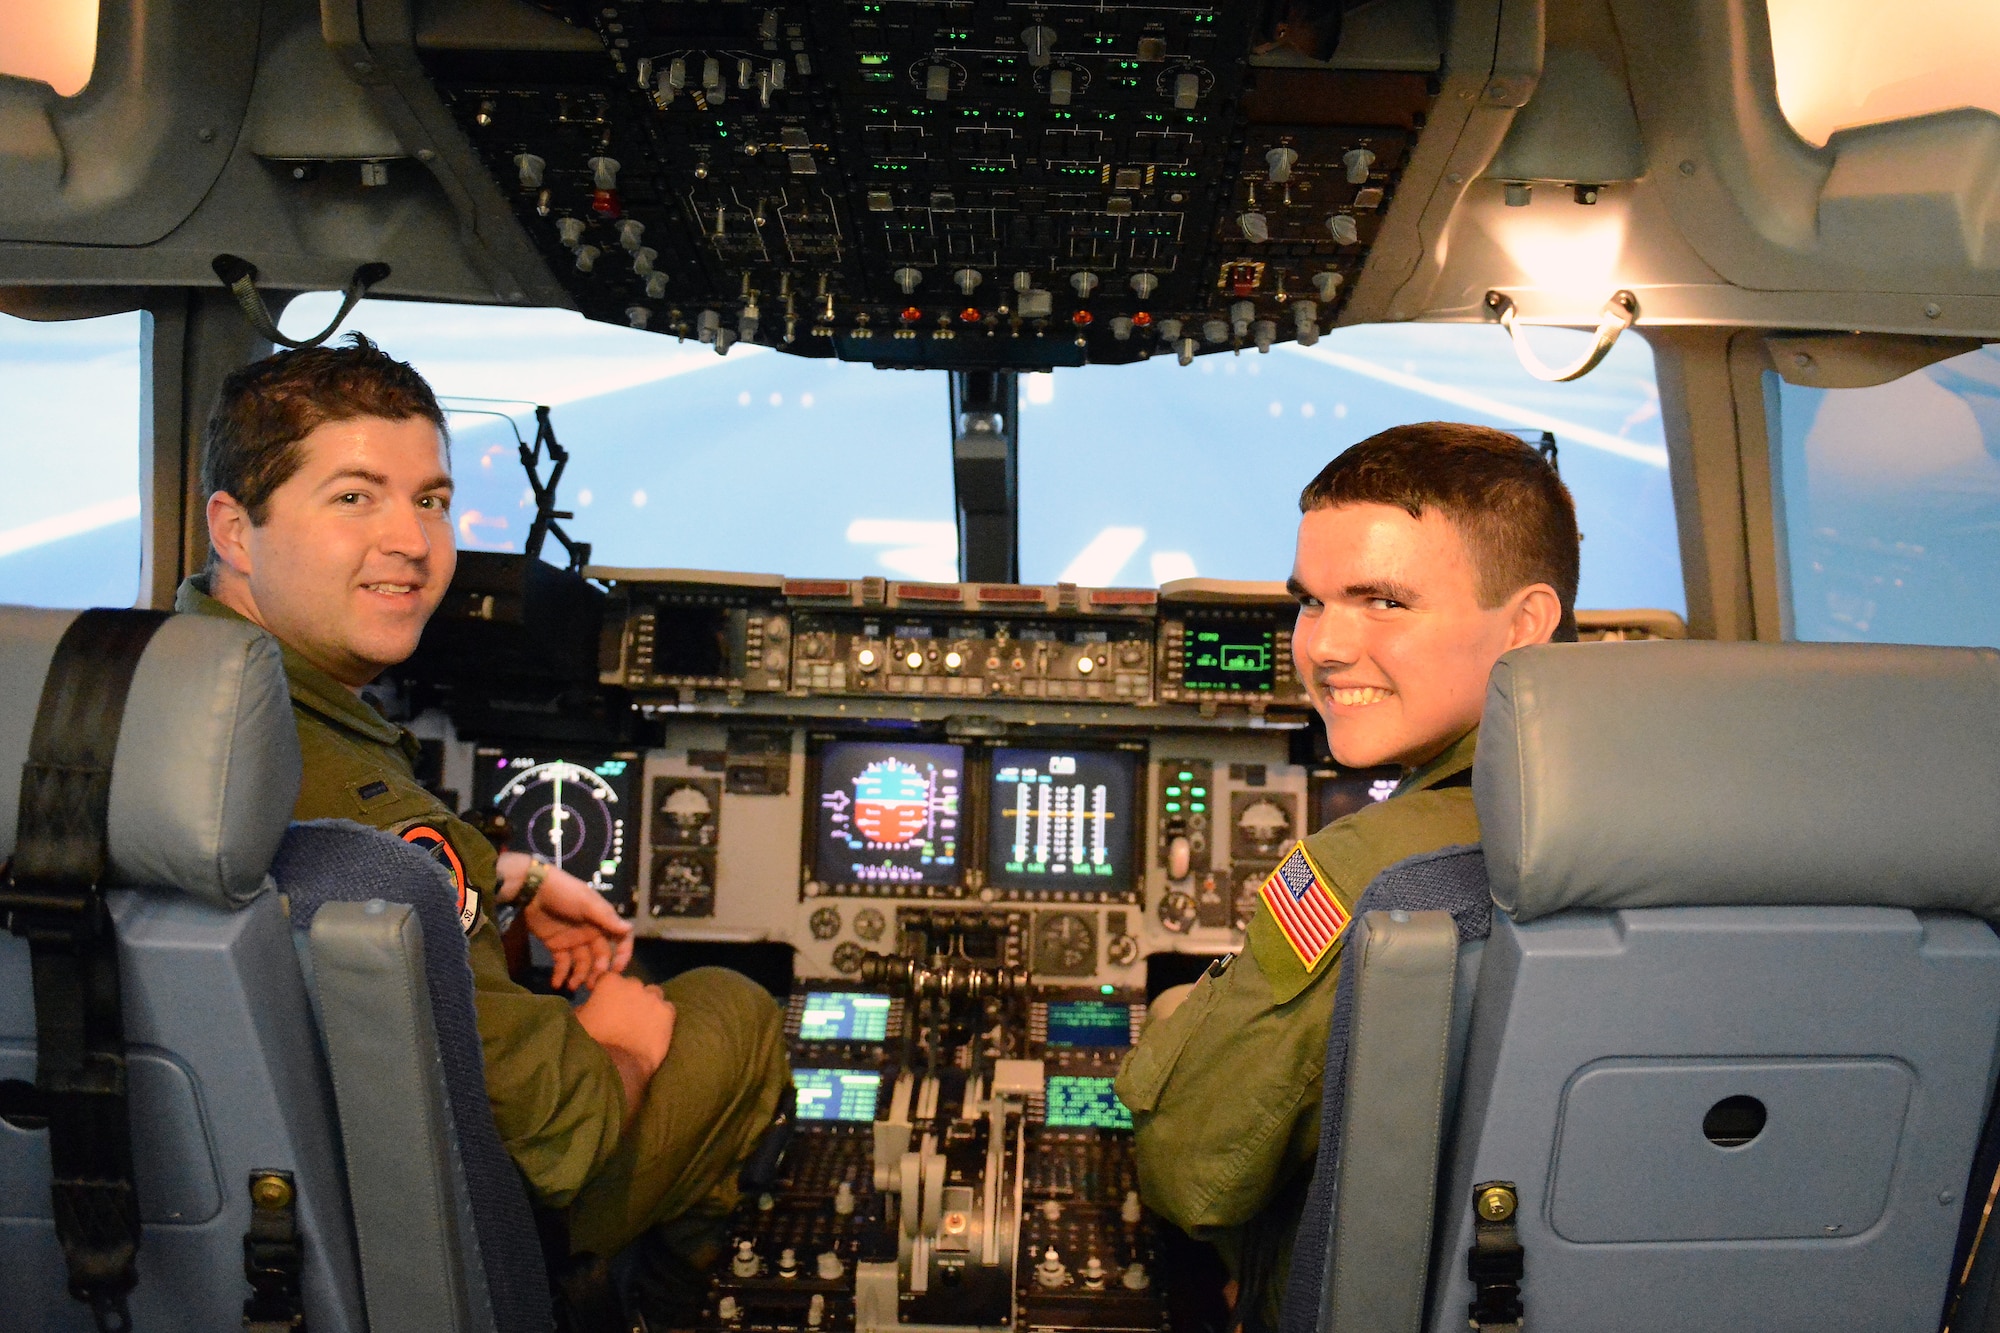 Jerry Connolly (right), pilot for a day, and 1st Lt. Brian Ray, 4th Airlift Squadron pilot, prepare for takeoff in a C-17 Globemaster III simulator July 14, 2014 at Joint Base Lewis McChord, Wash. With the assistance of Ray, Connolly was allowed to fly the C-17 attempting various maneuvers and landing. (U.S. Air Force photo/Airman 1st Class Jacob Jimenez) 